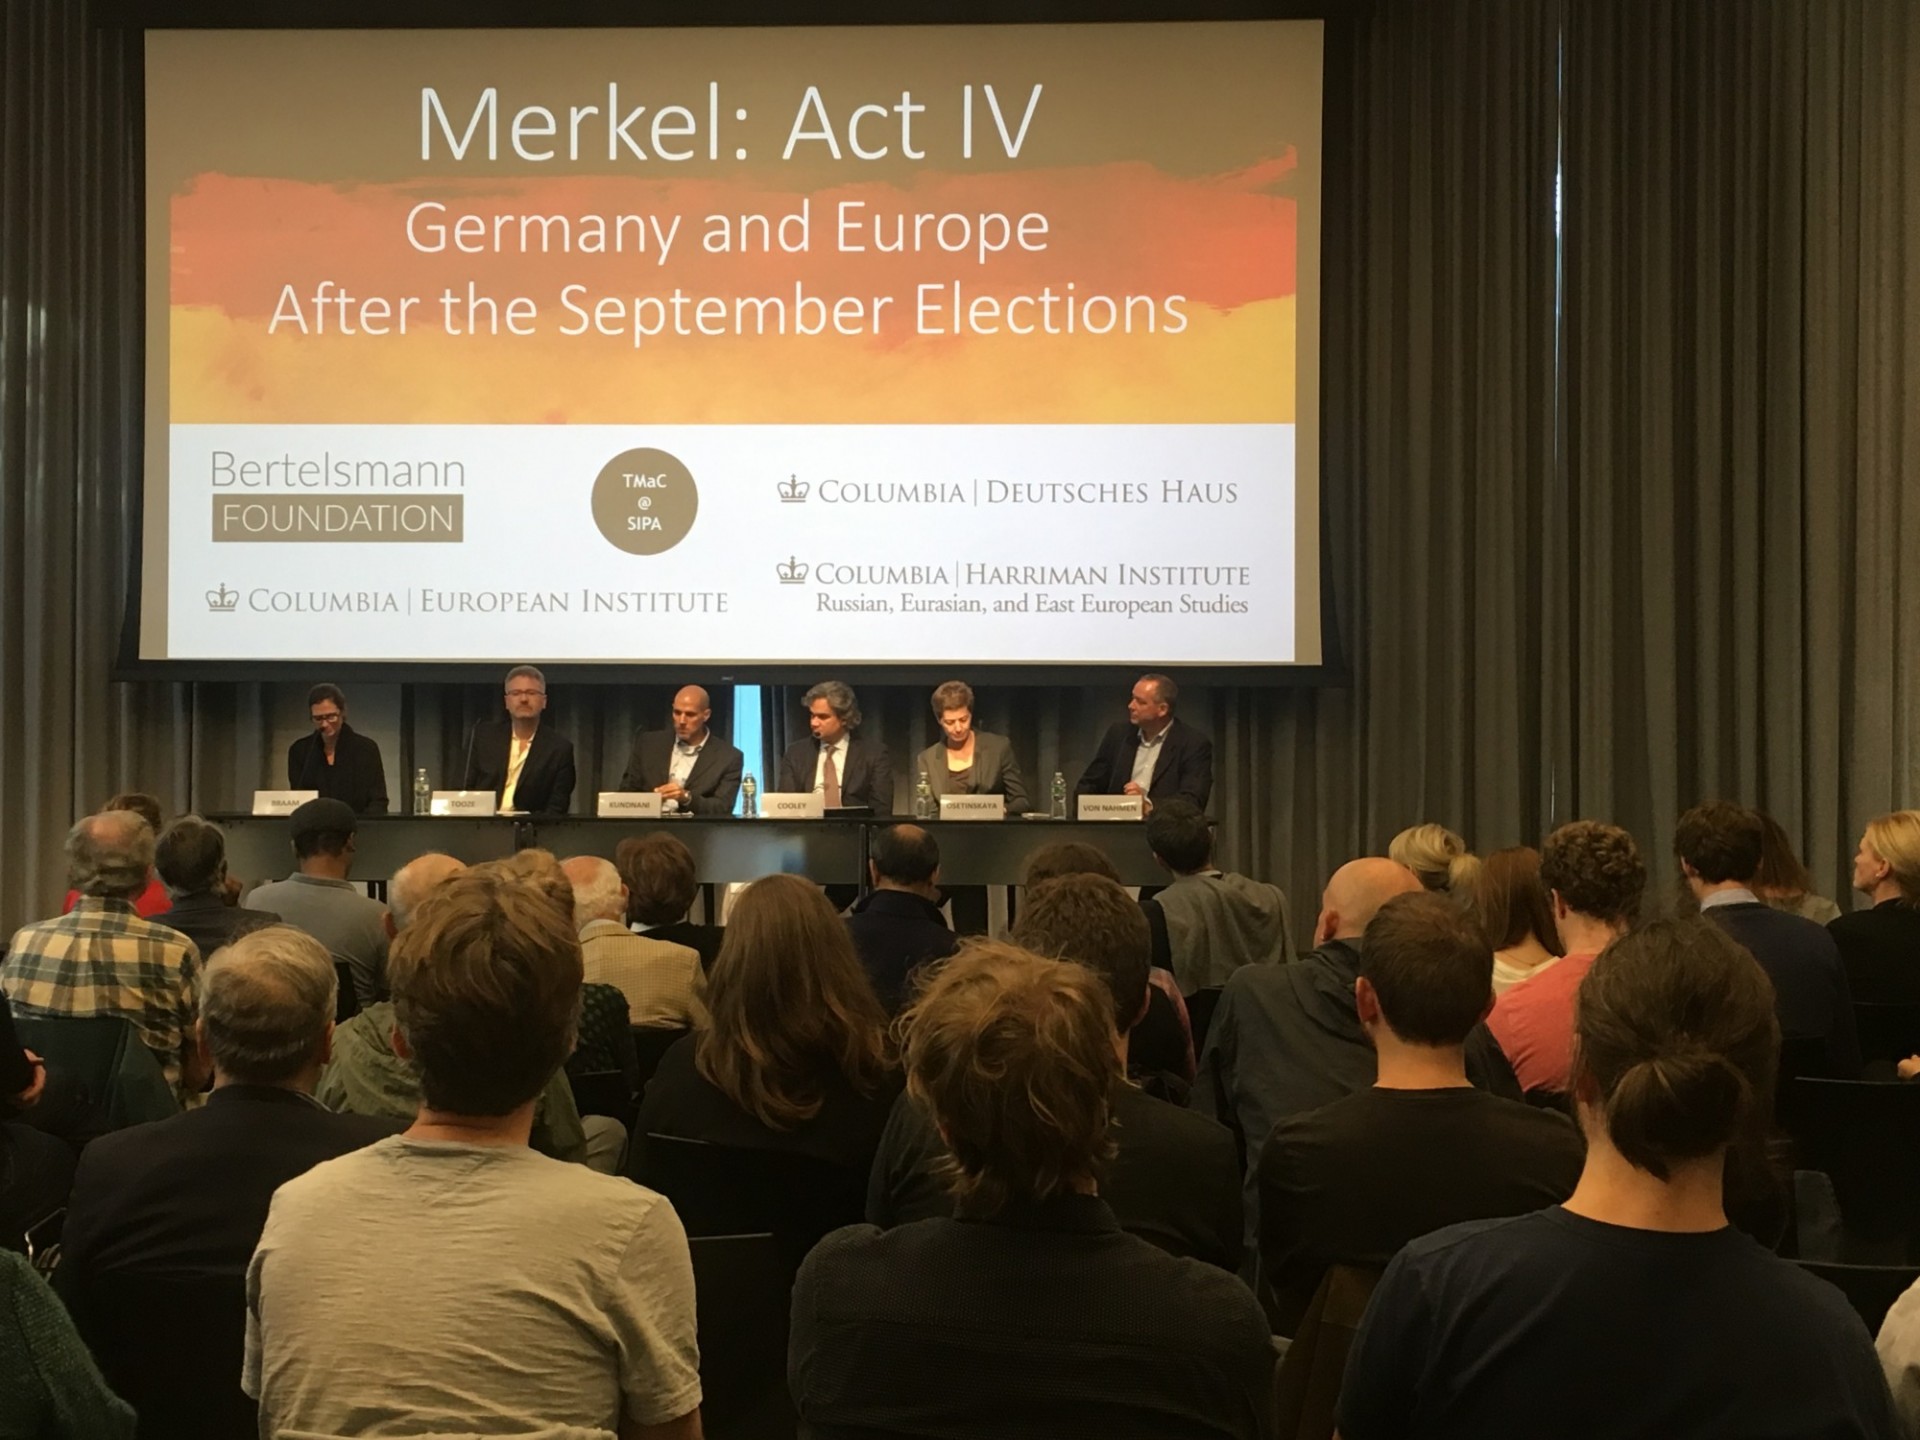 Panelists on stage discuss German elections results and implications, with an attentive audience at Columbia University.